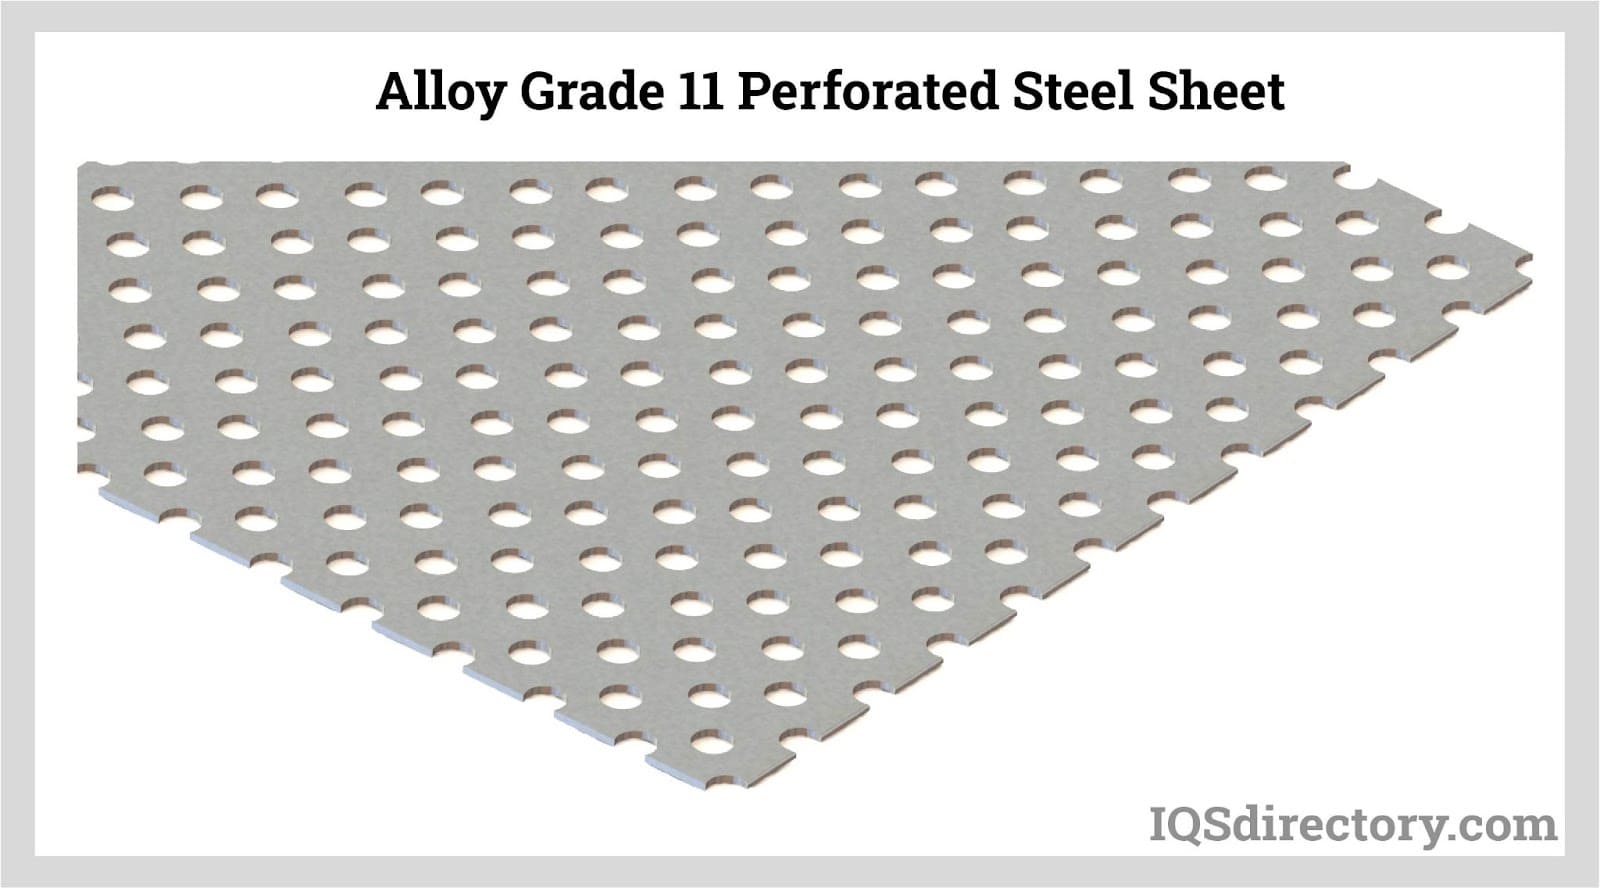 Alloy Grade 11 Perforated Steel Sheet